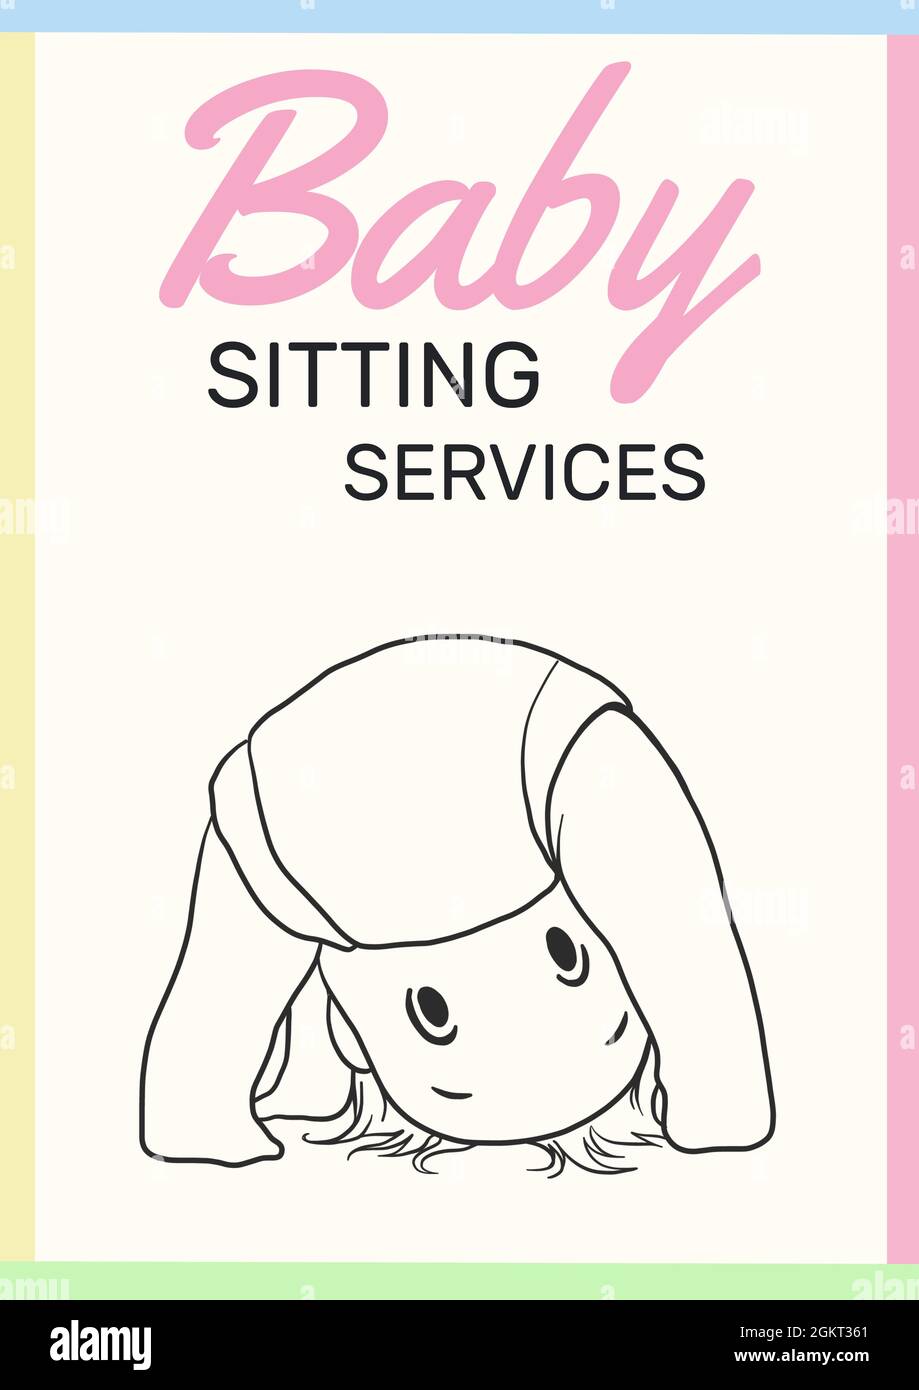 Baby sitting services text over baby icon against white background Stock Photo